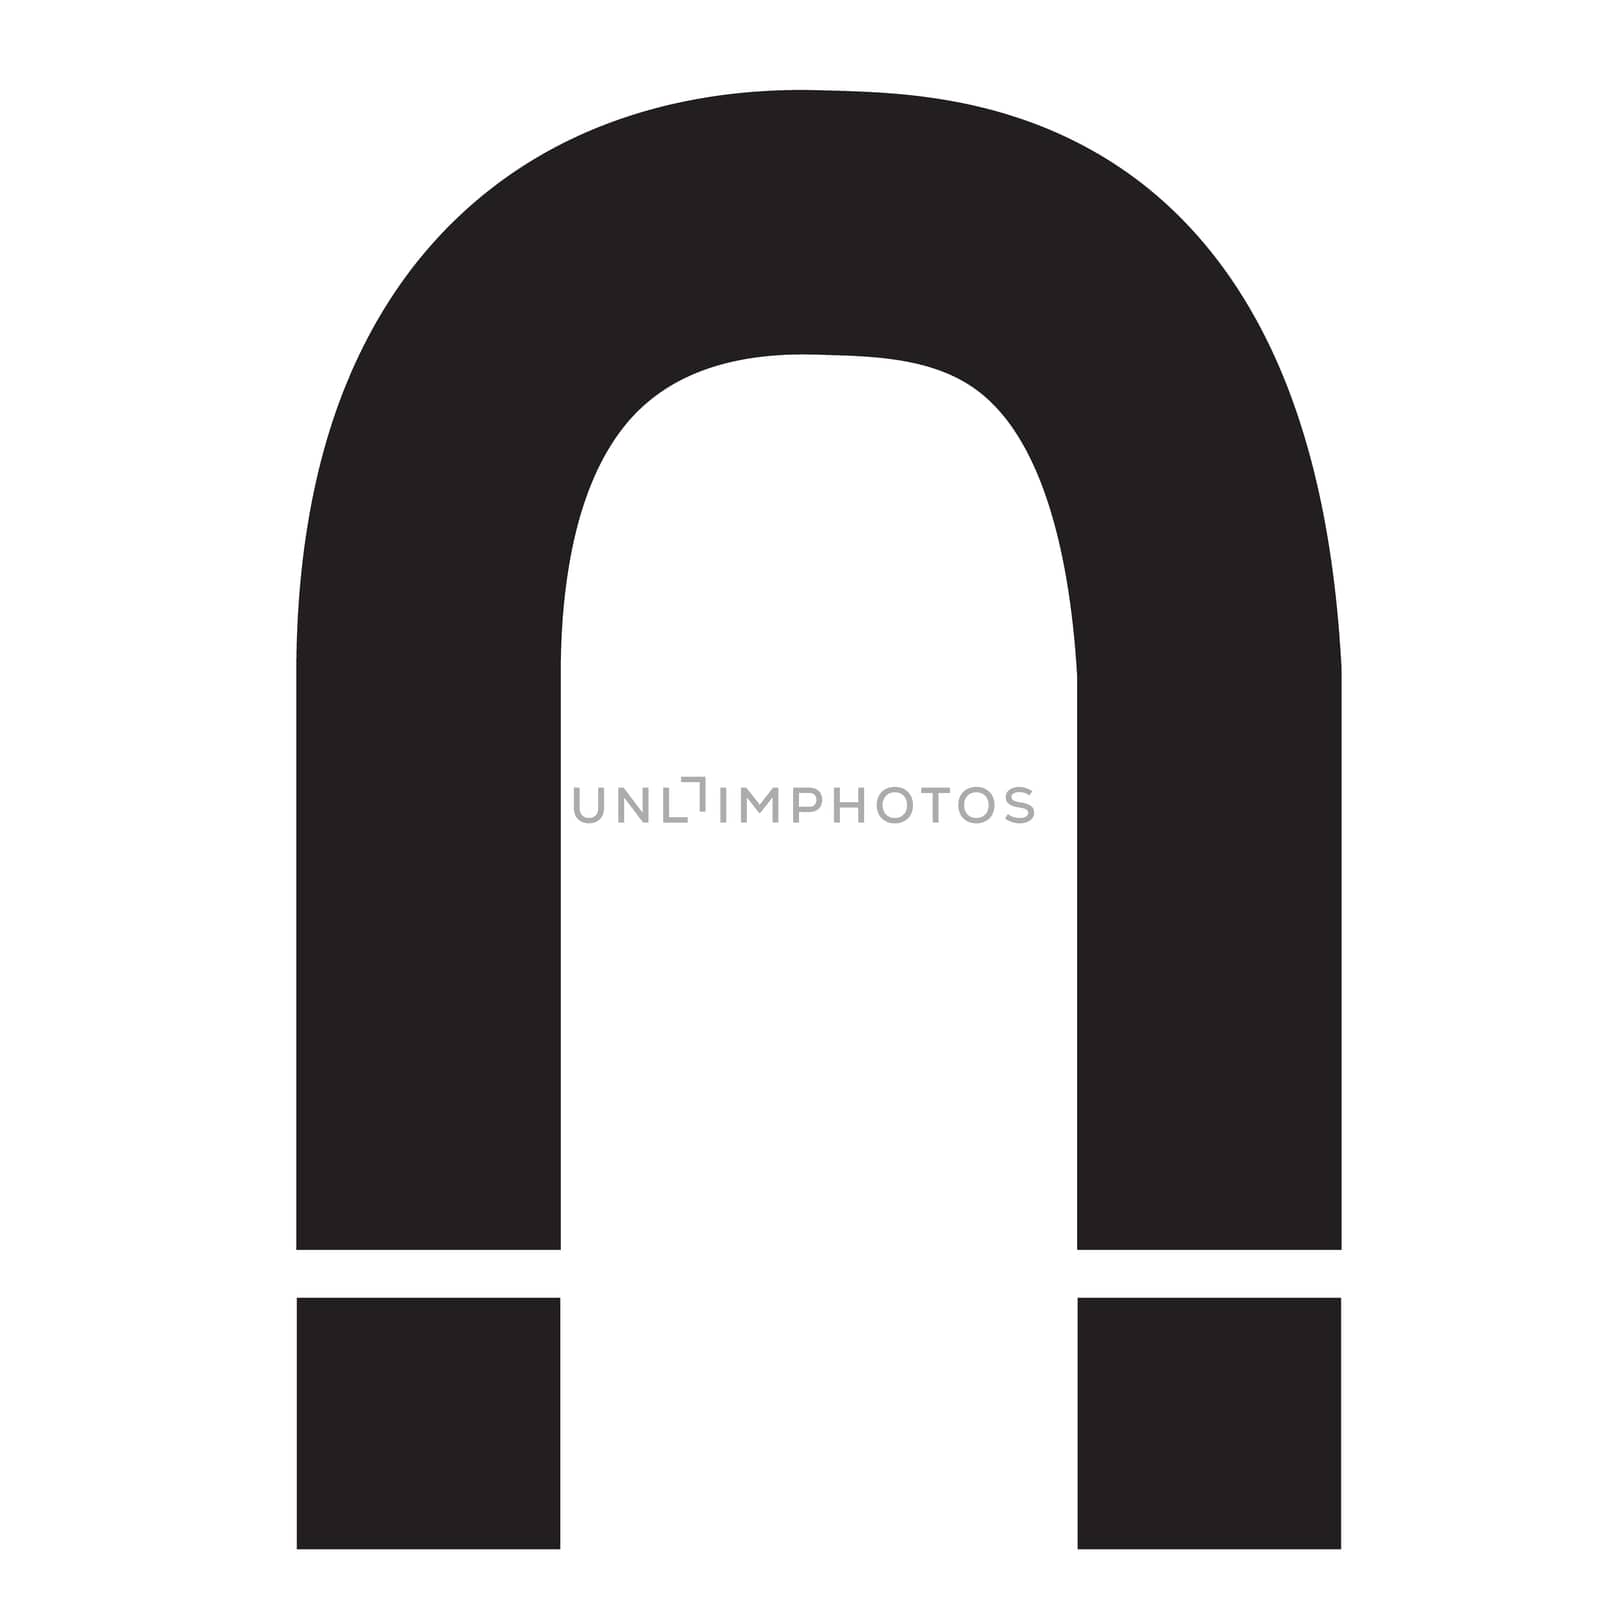 Magnet icon on white background. black magnet sign. flat style. magnetism icon icon for your web site design, logo, app, UI. physics symbol.